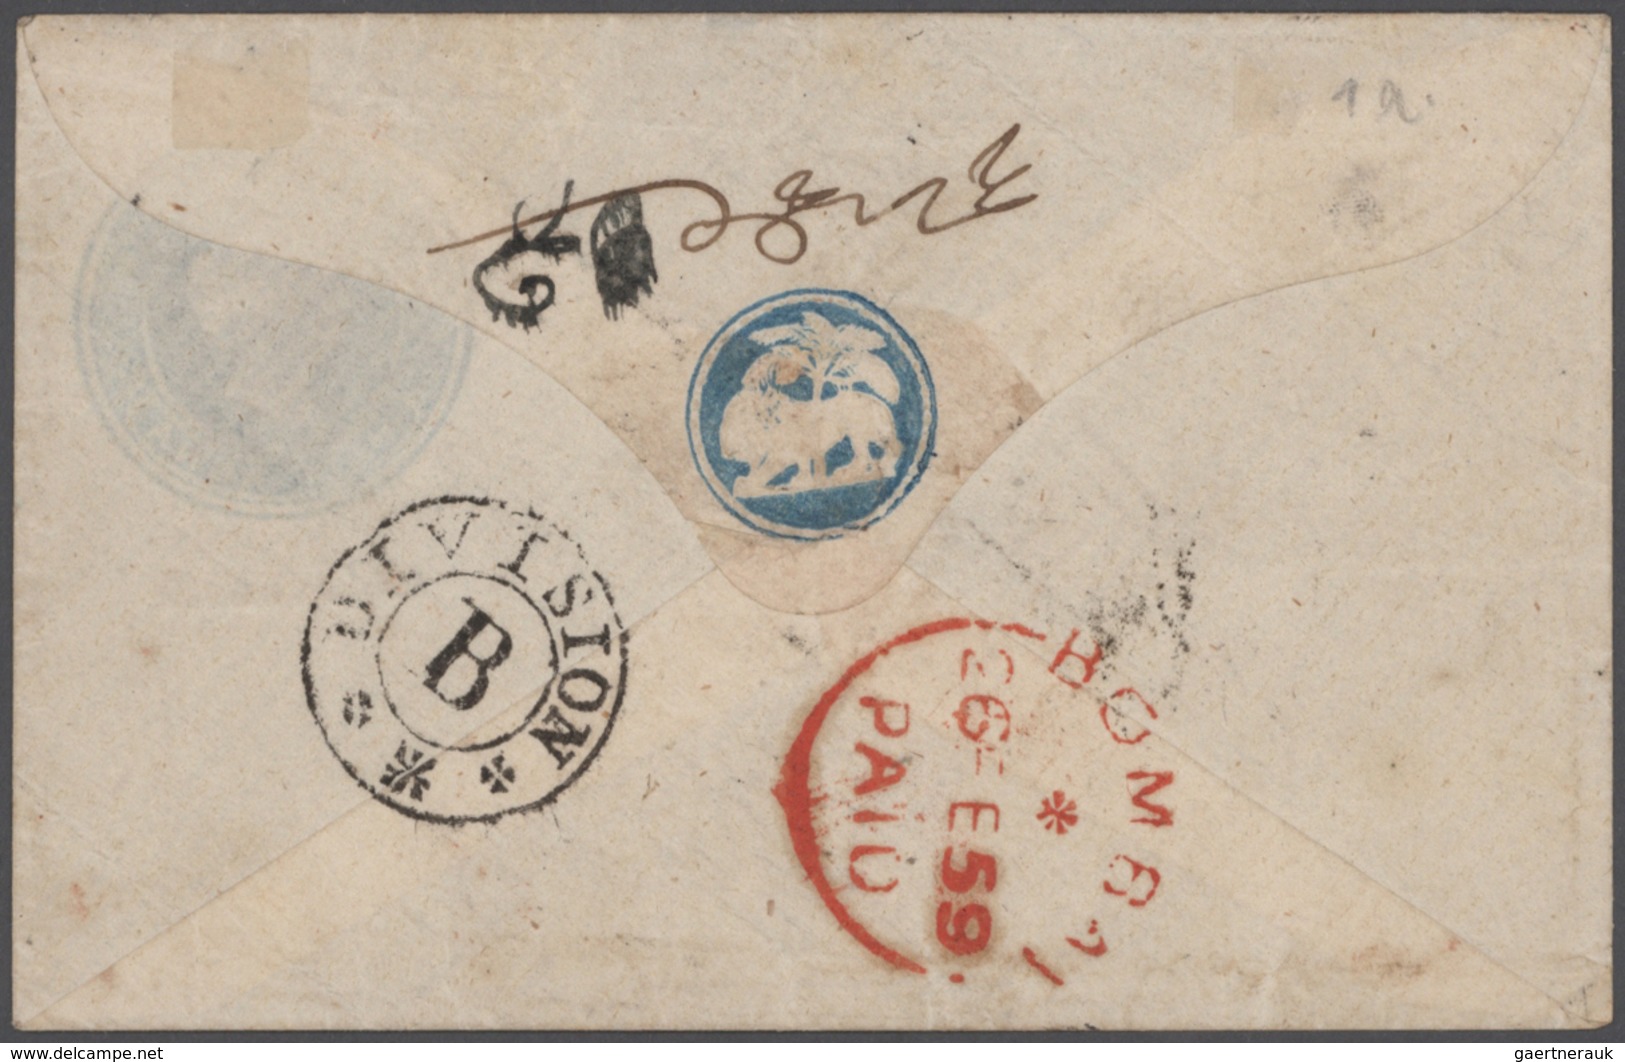 Indien - Ganzsachen: 1857-1947 "THE POSTAL STATIONERY OF BRITISH INDIA": Specialized collection of a